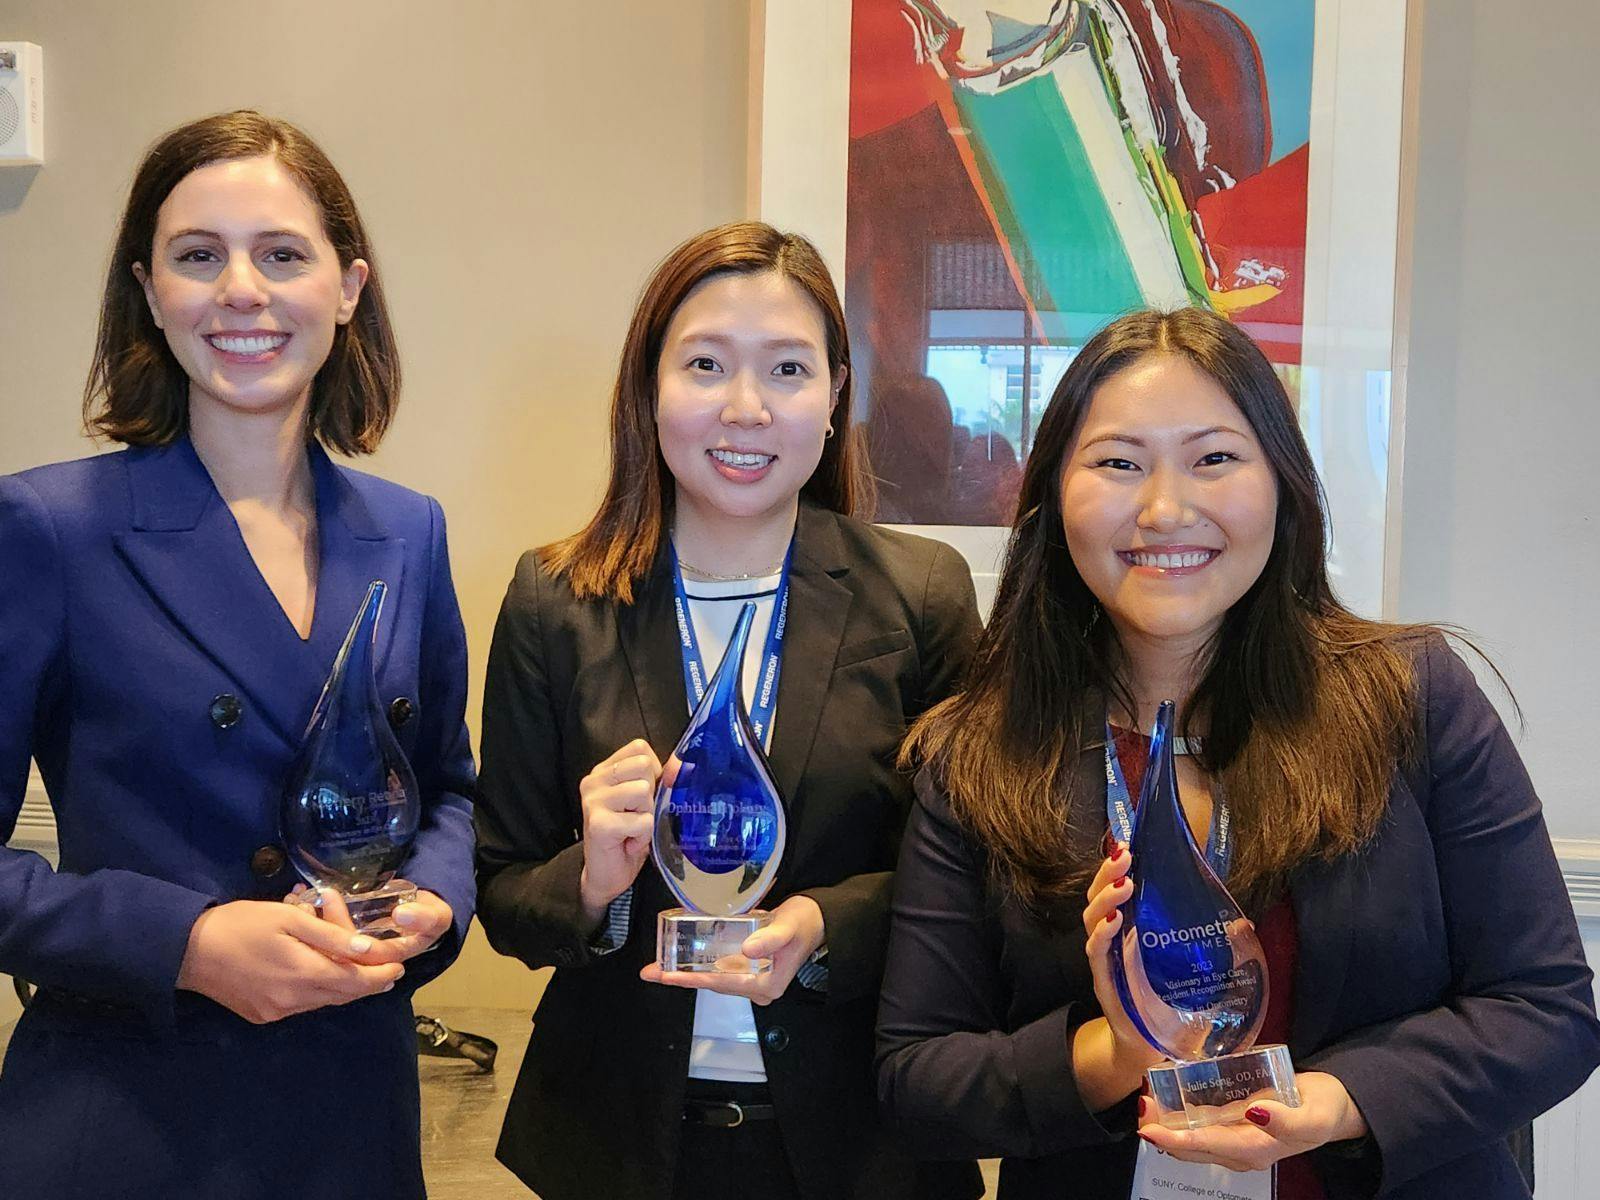 Three residents were honored with the 2023 Visionary in Eye Care Resident Recognition Award. From left: Marta Stevanovic, MD, Mass Eye and Ear, Harvard Medical School, Boston, Massachusetts; Moon Jeong Lee, MD, Wilmer Eye Institute, Johns Hopkins University School of Medicine, Baltimore, Maryland; and Julie Song, OD, FAAO, SUNY College of Optometry, New York, New York. (Photo by Sheryl Stevenson)